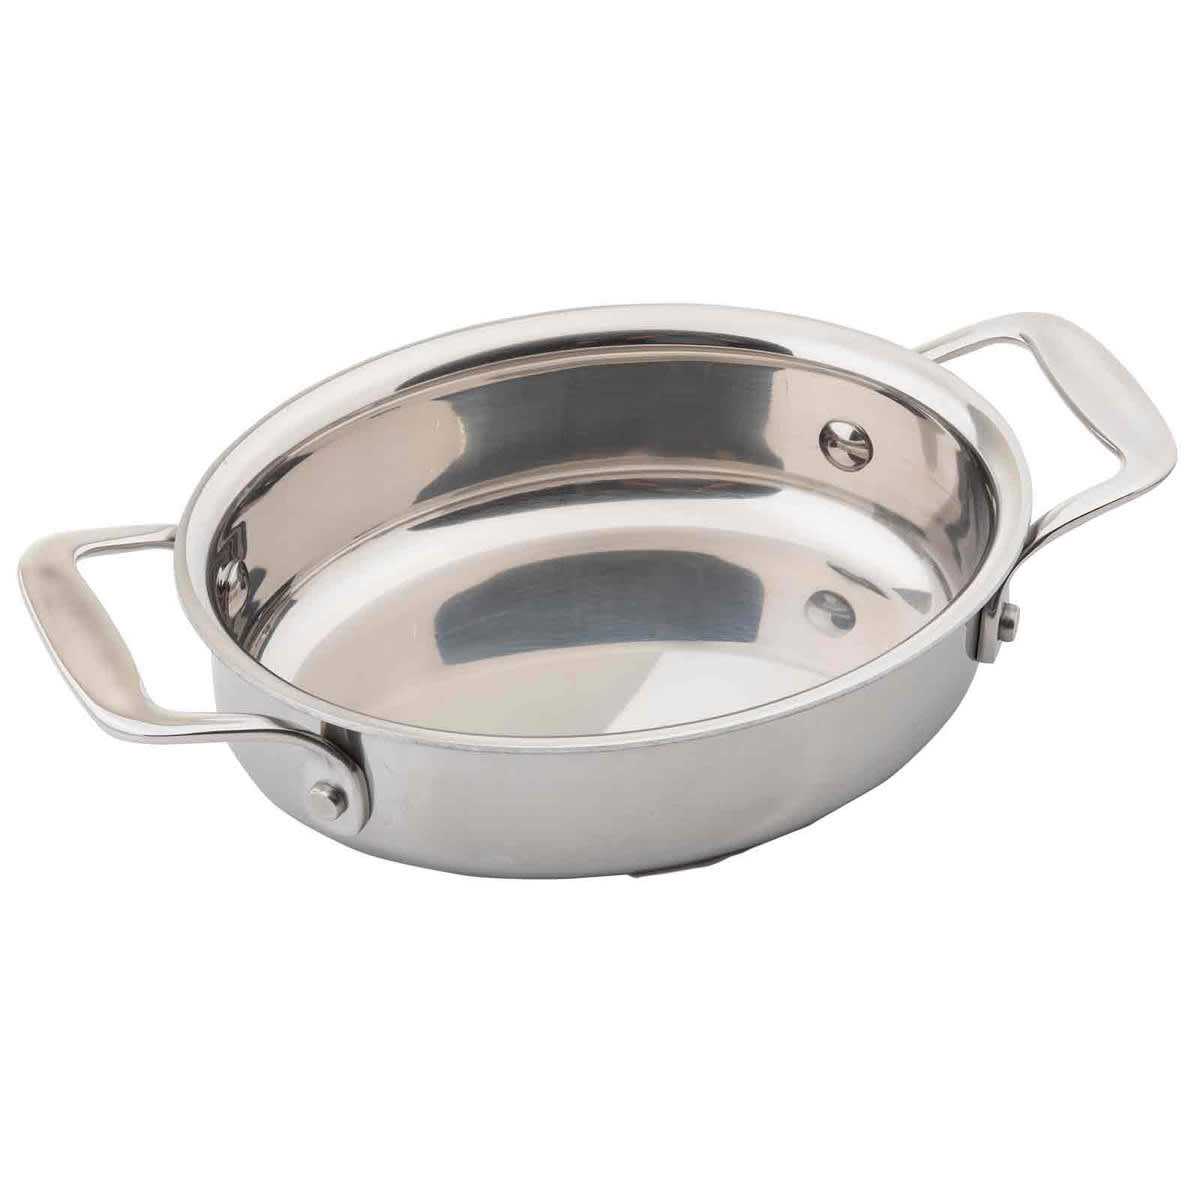 Details about   MIRROR FINISHING CASSEROLE Cook and Serve Casserole-9GY 